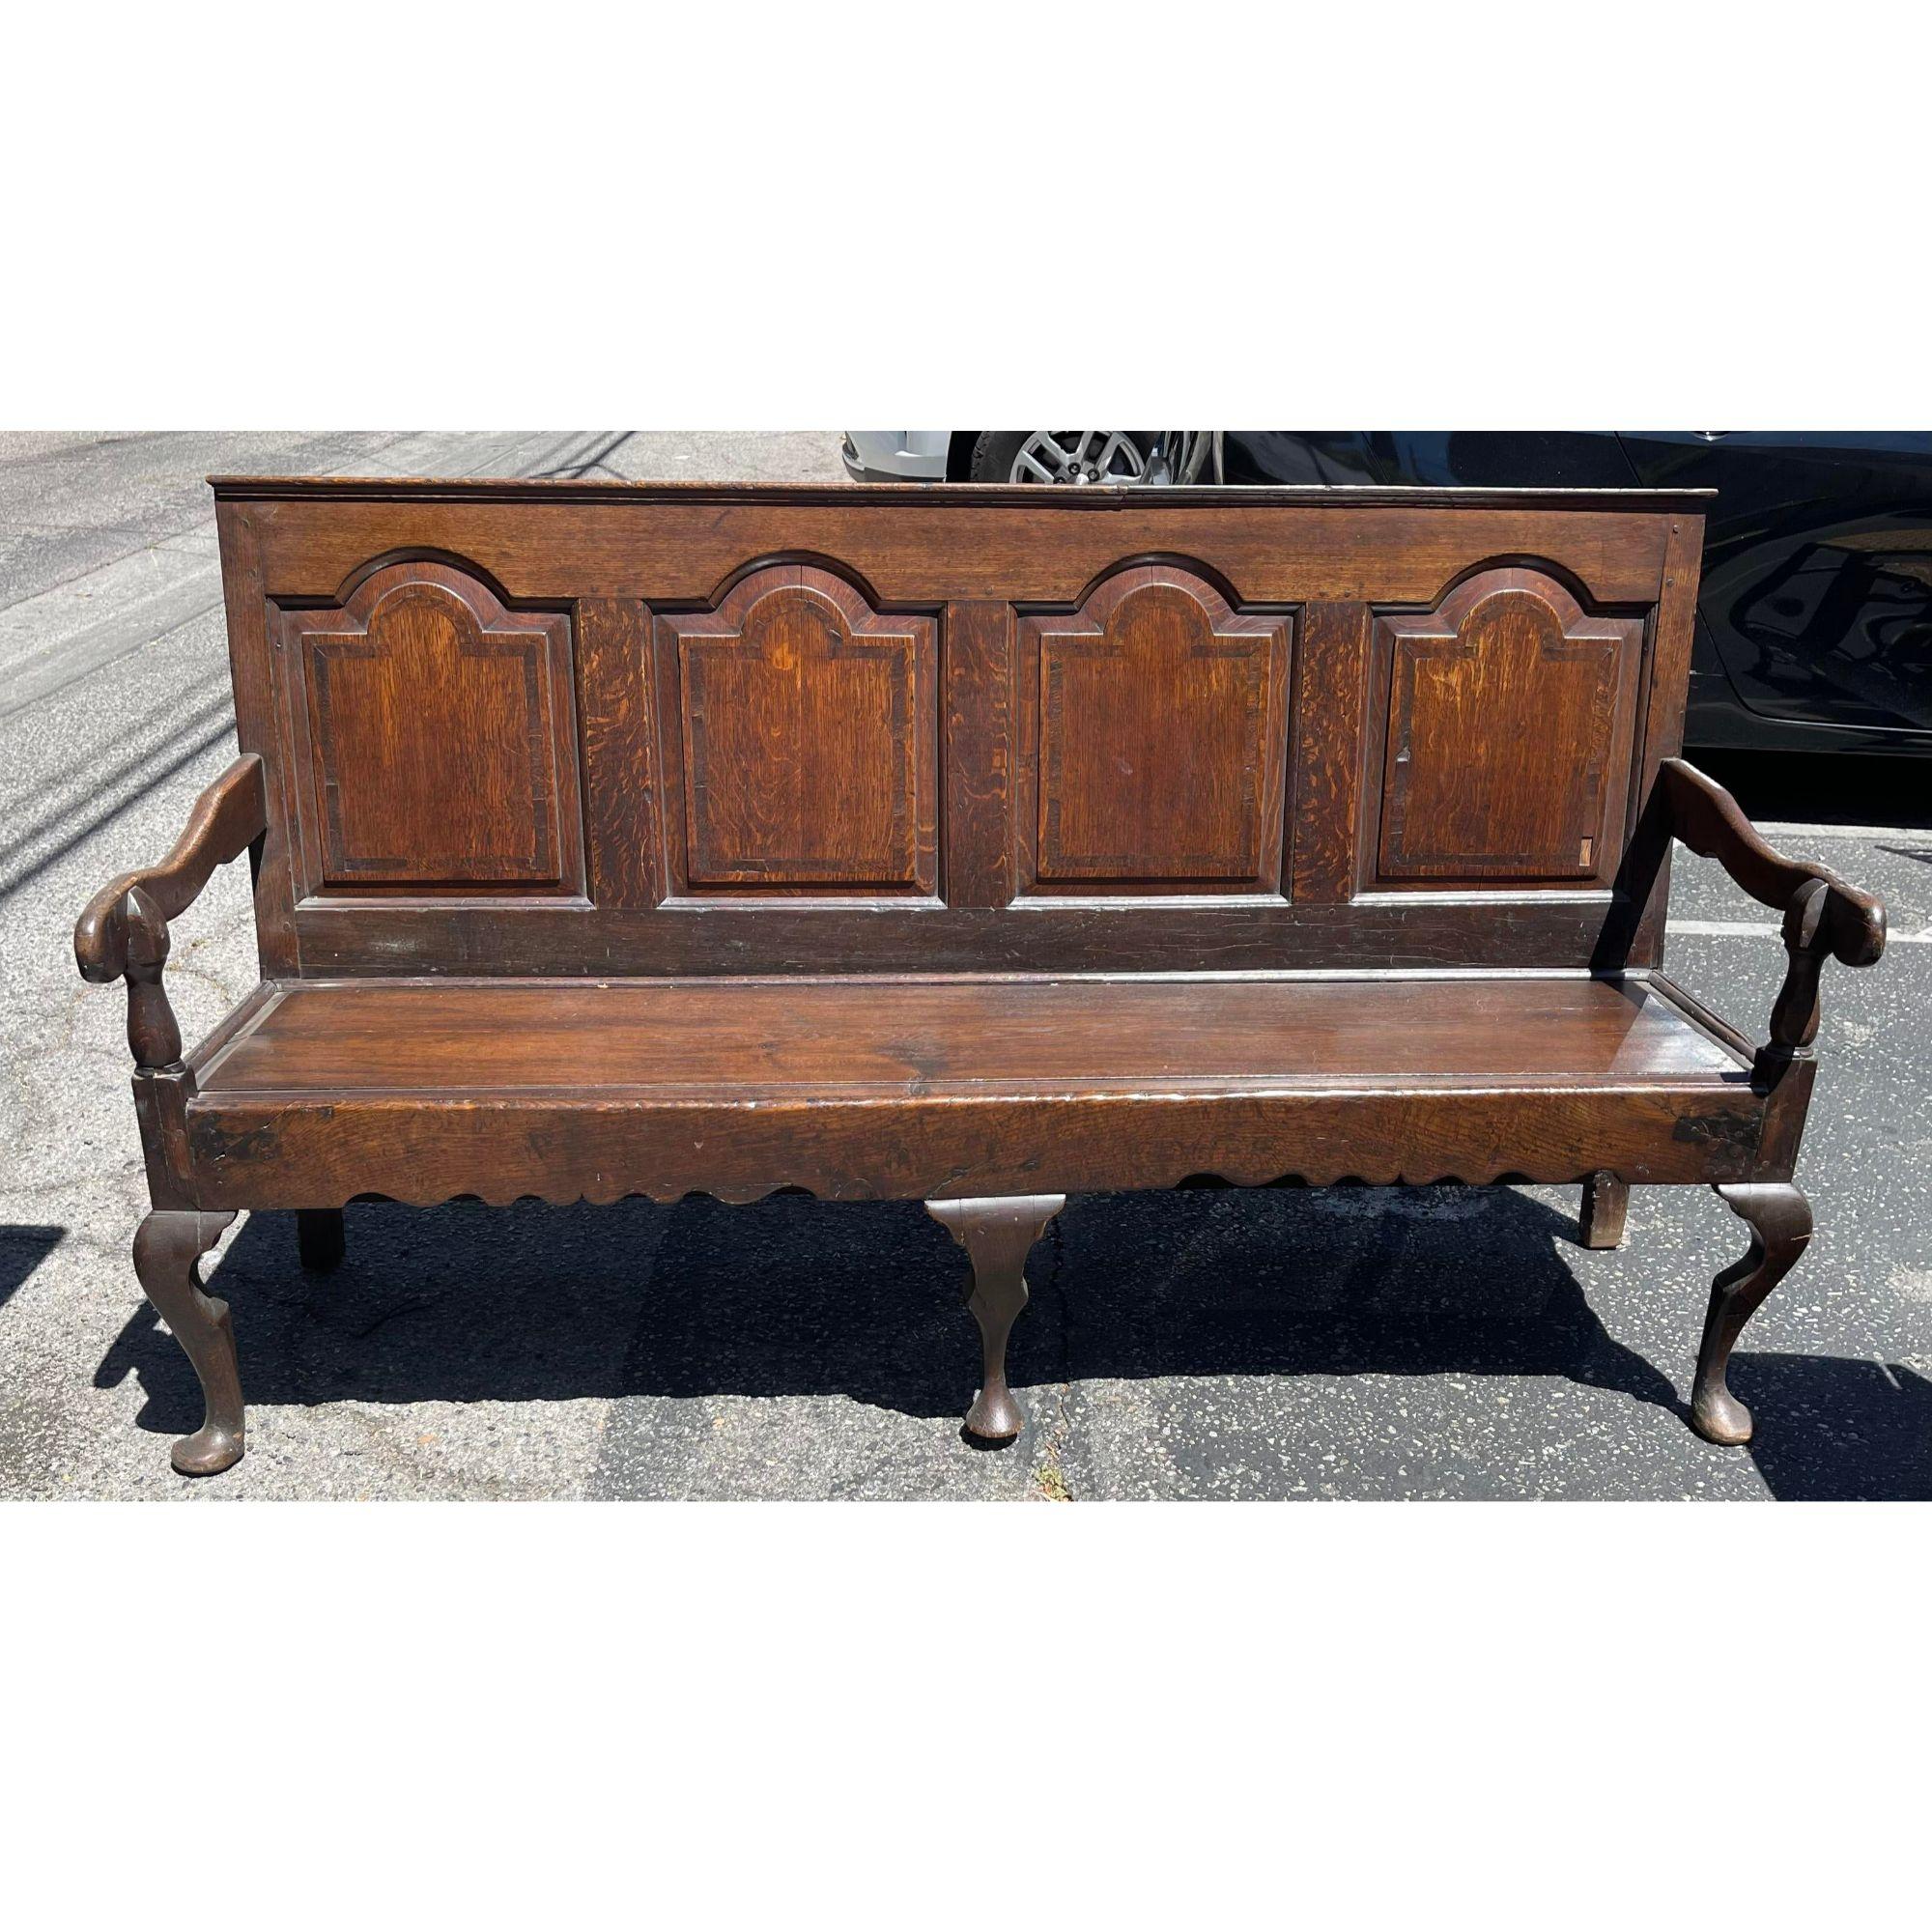 Antique 18th century George III Oak Settle Hall Bench. Beautiful Primitive form with original patina.

Additional information: 
Materials: Oak
Color: Brown
Period: 18th century
Styles: American, English
Item Type: Vintage, Antique or